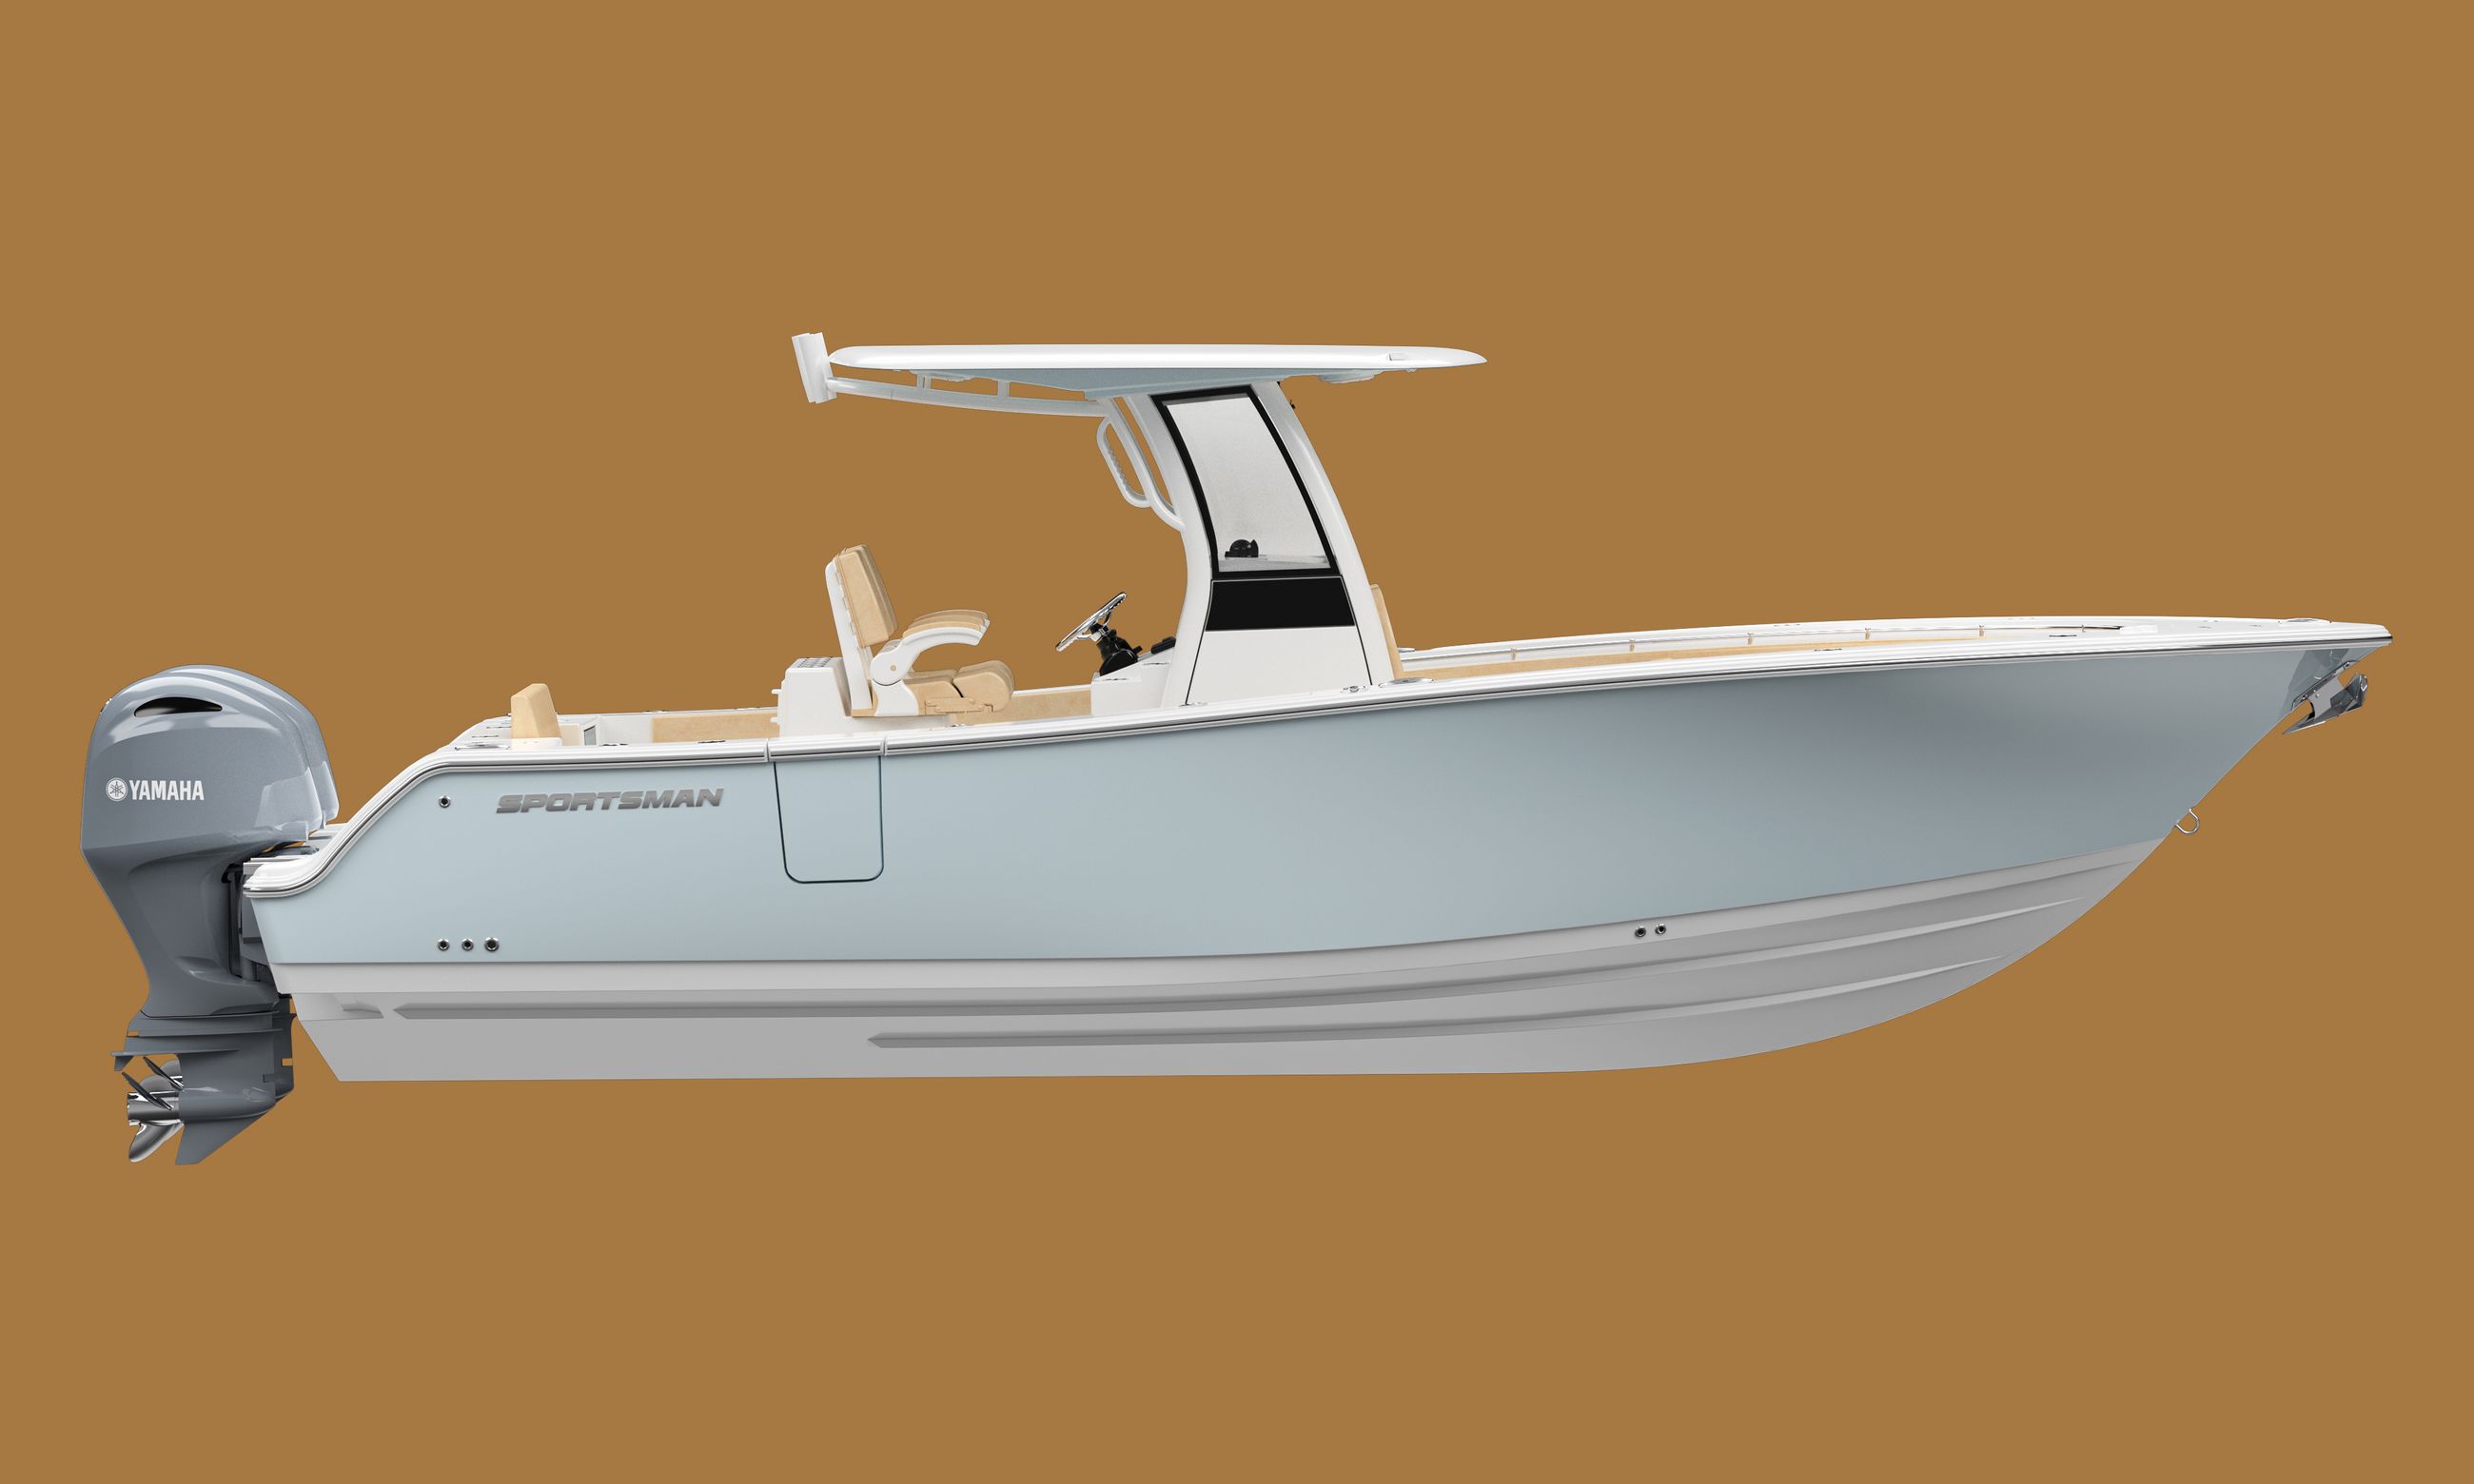 Engine options for the 262-center-console